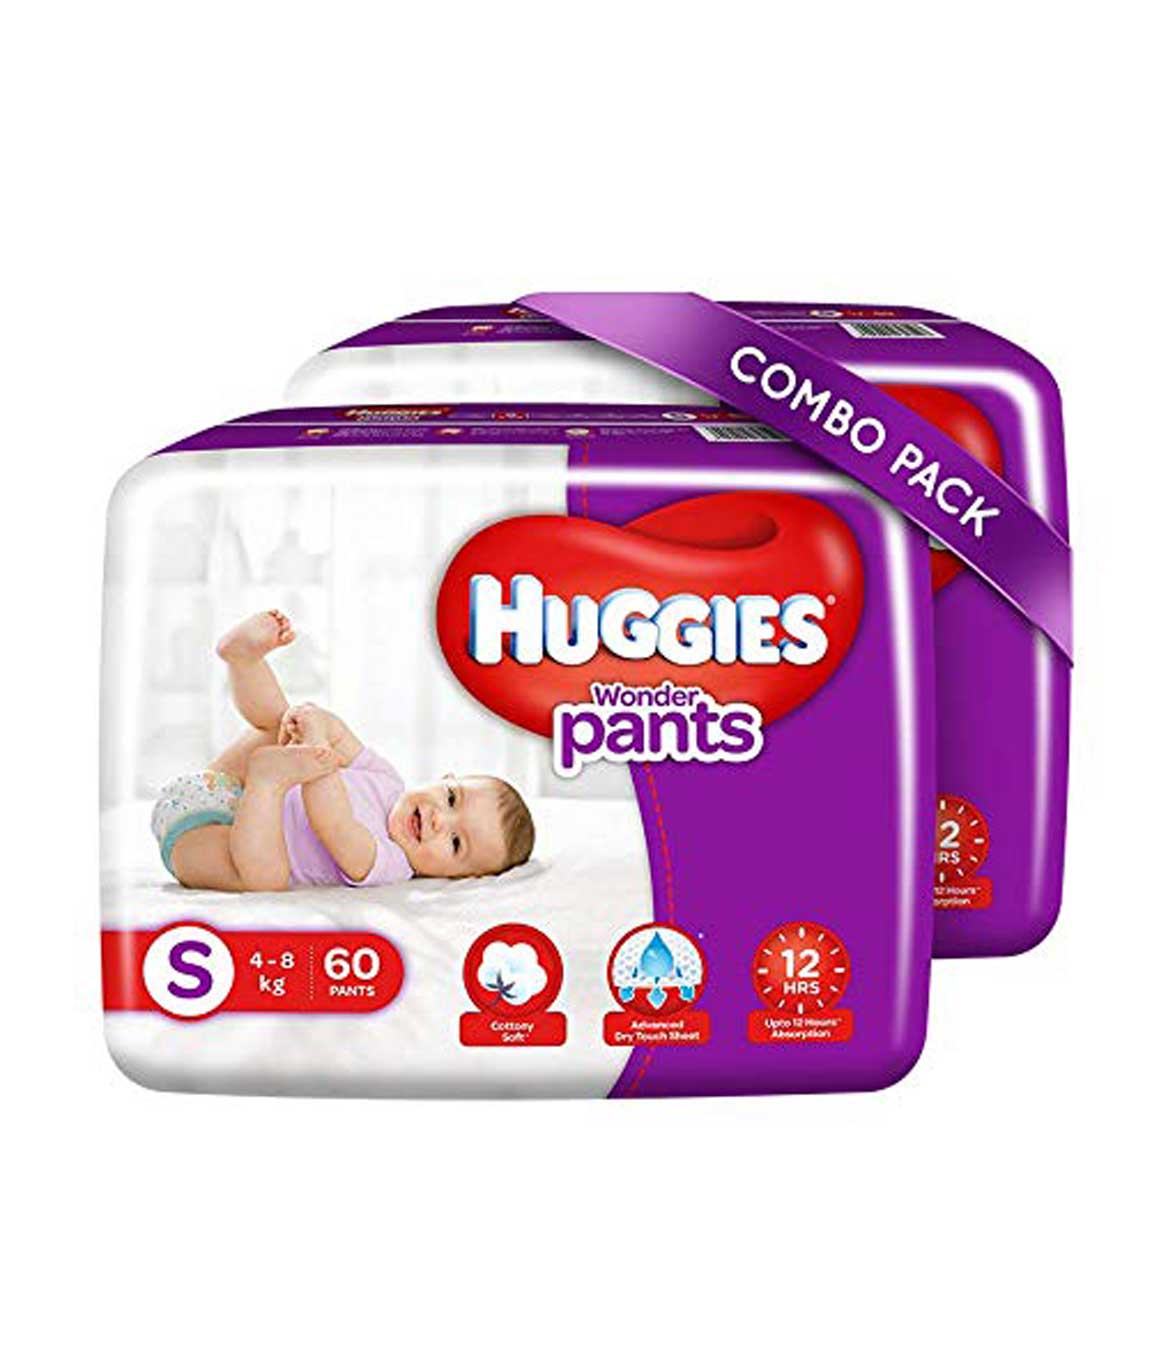 Huggies Wonder Pants Small Size Diapers Combo Pack of 2 60 Counts Per Pack 120 Counts